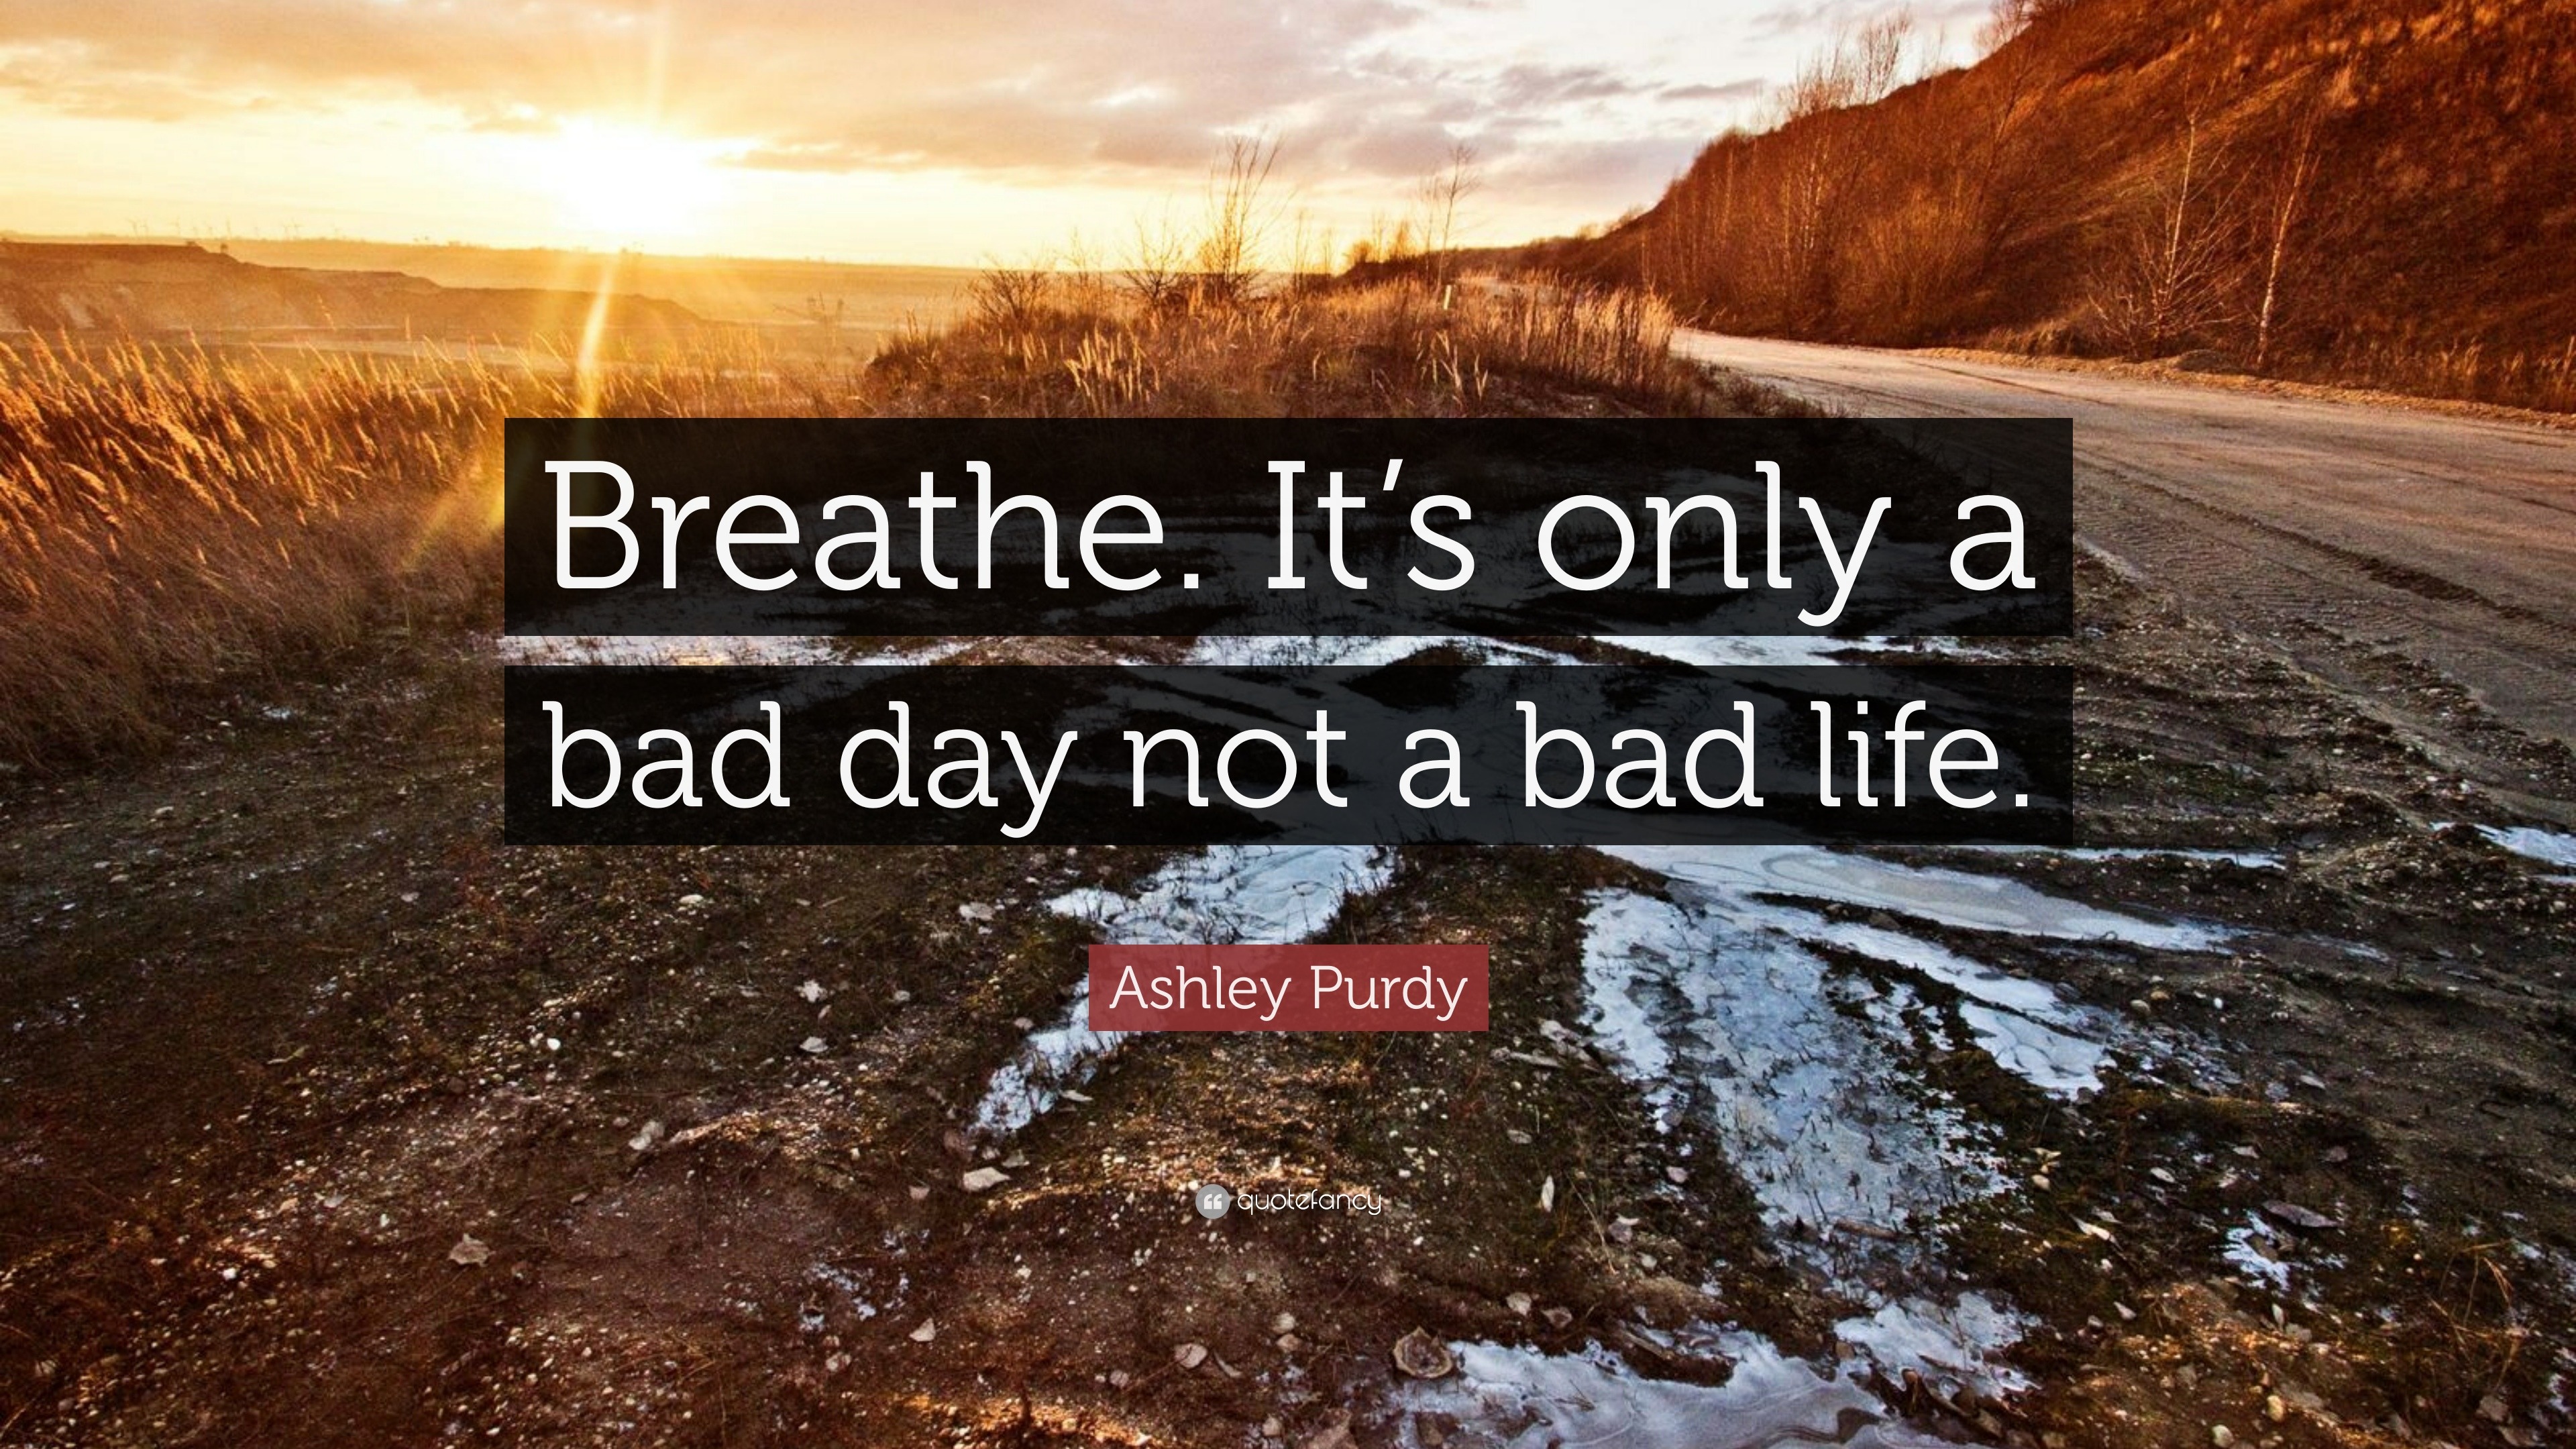 Ashley Purdy Quote: “Breathe. It's only a bad day not a bad life.”